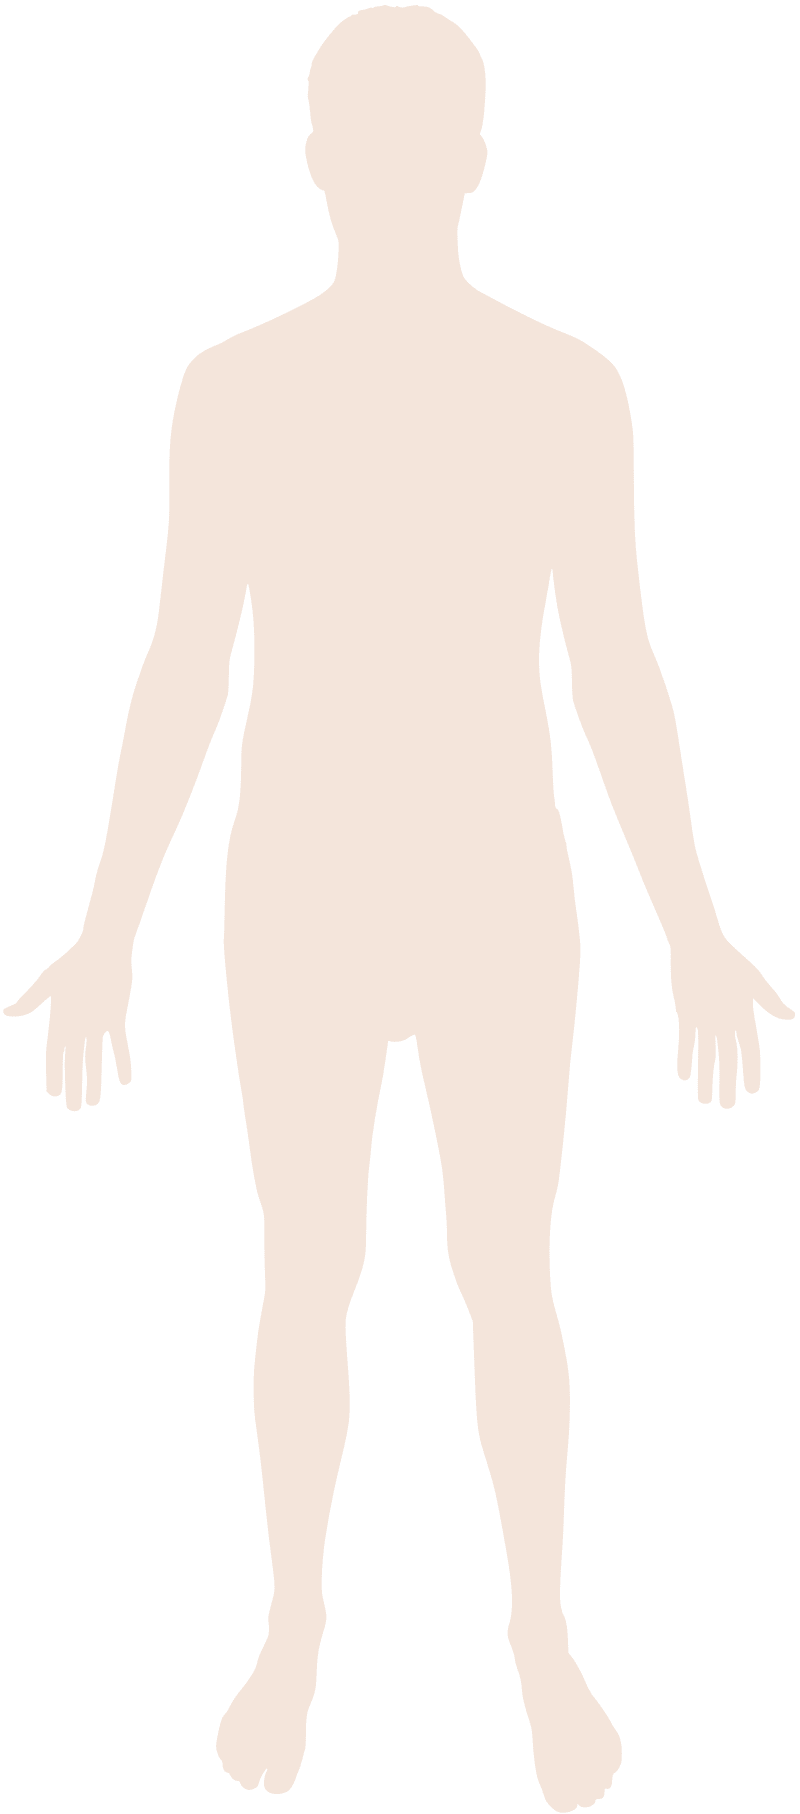 Human body silhouette clipart image